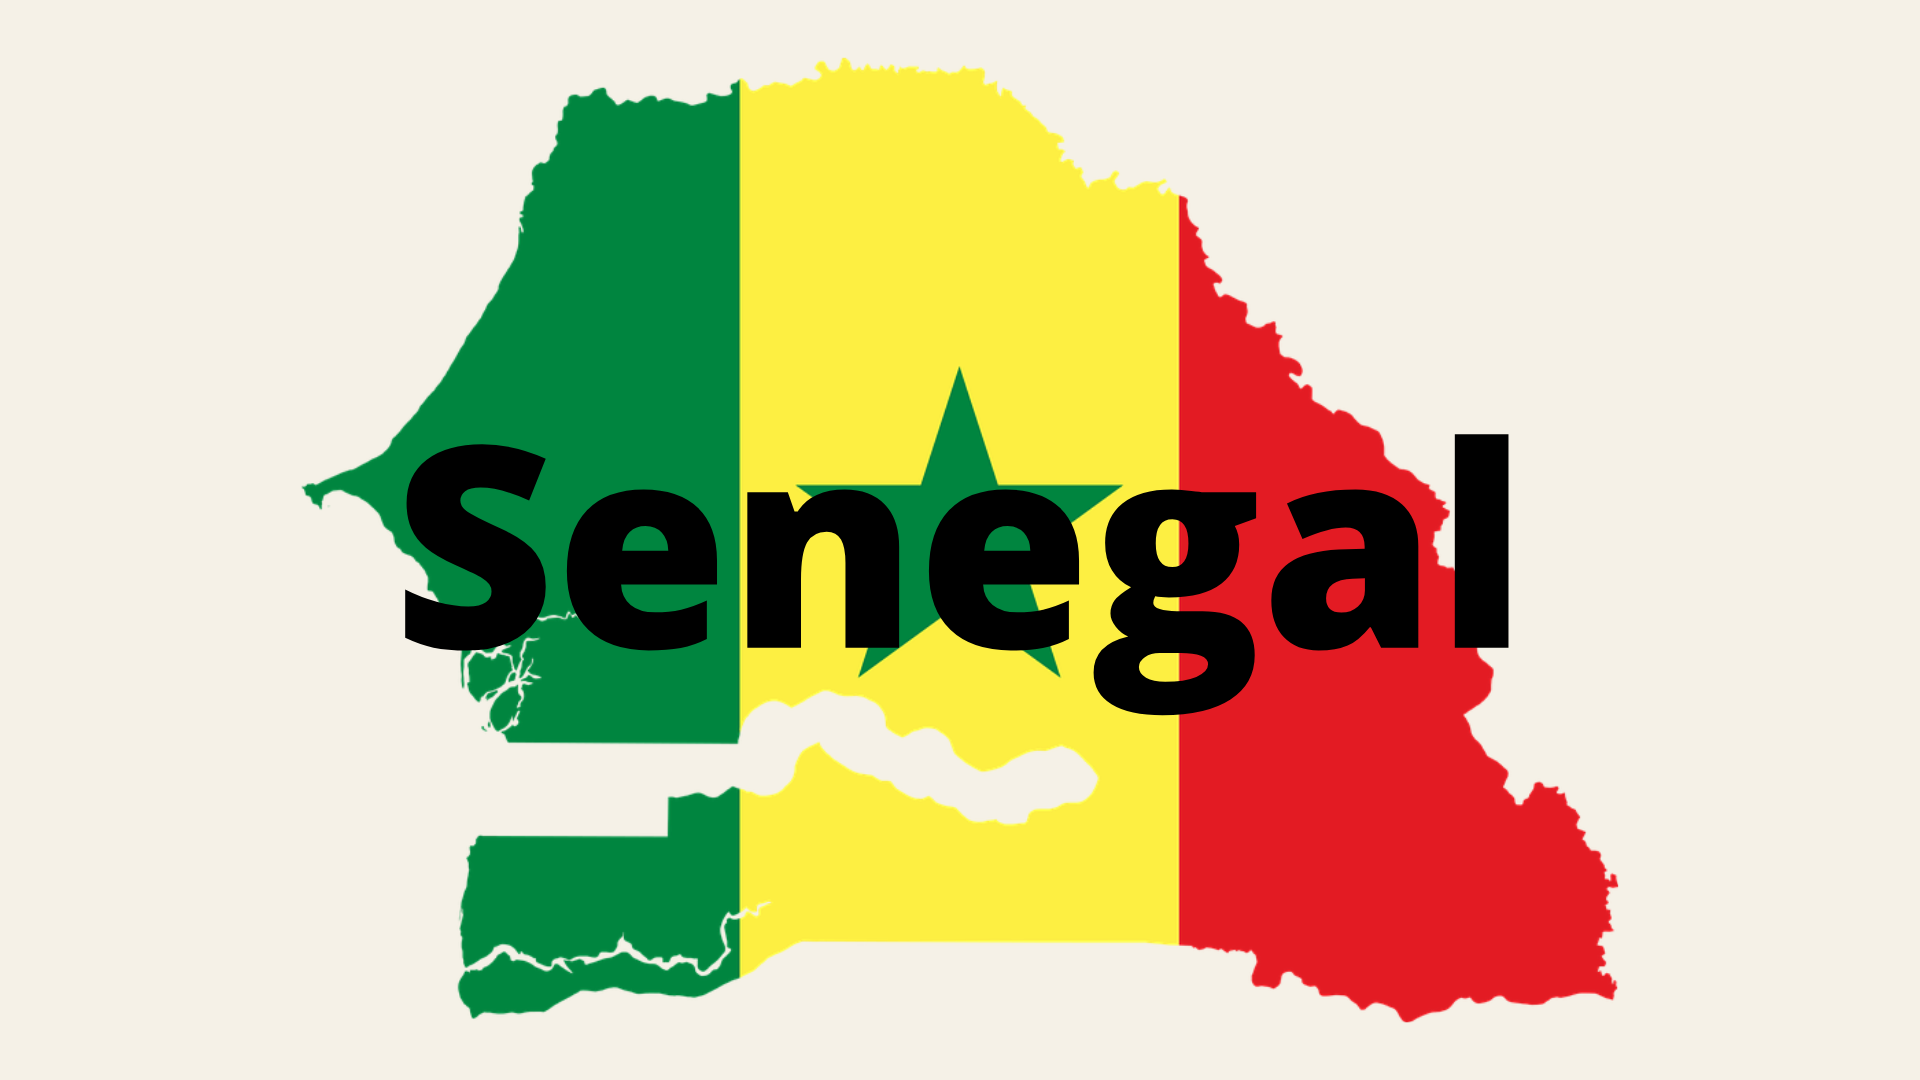 Senegal country outline with national flag